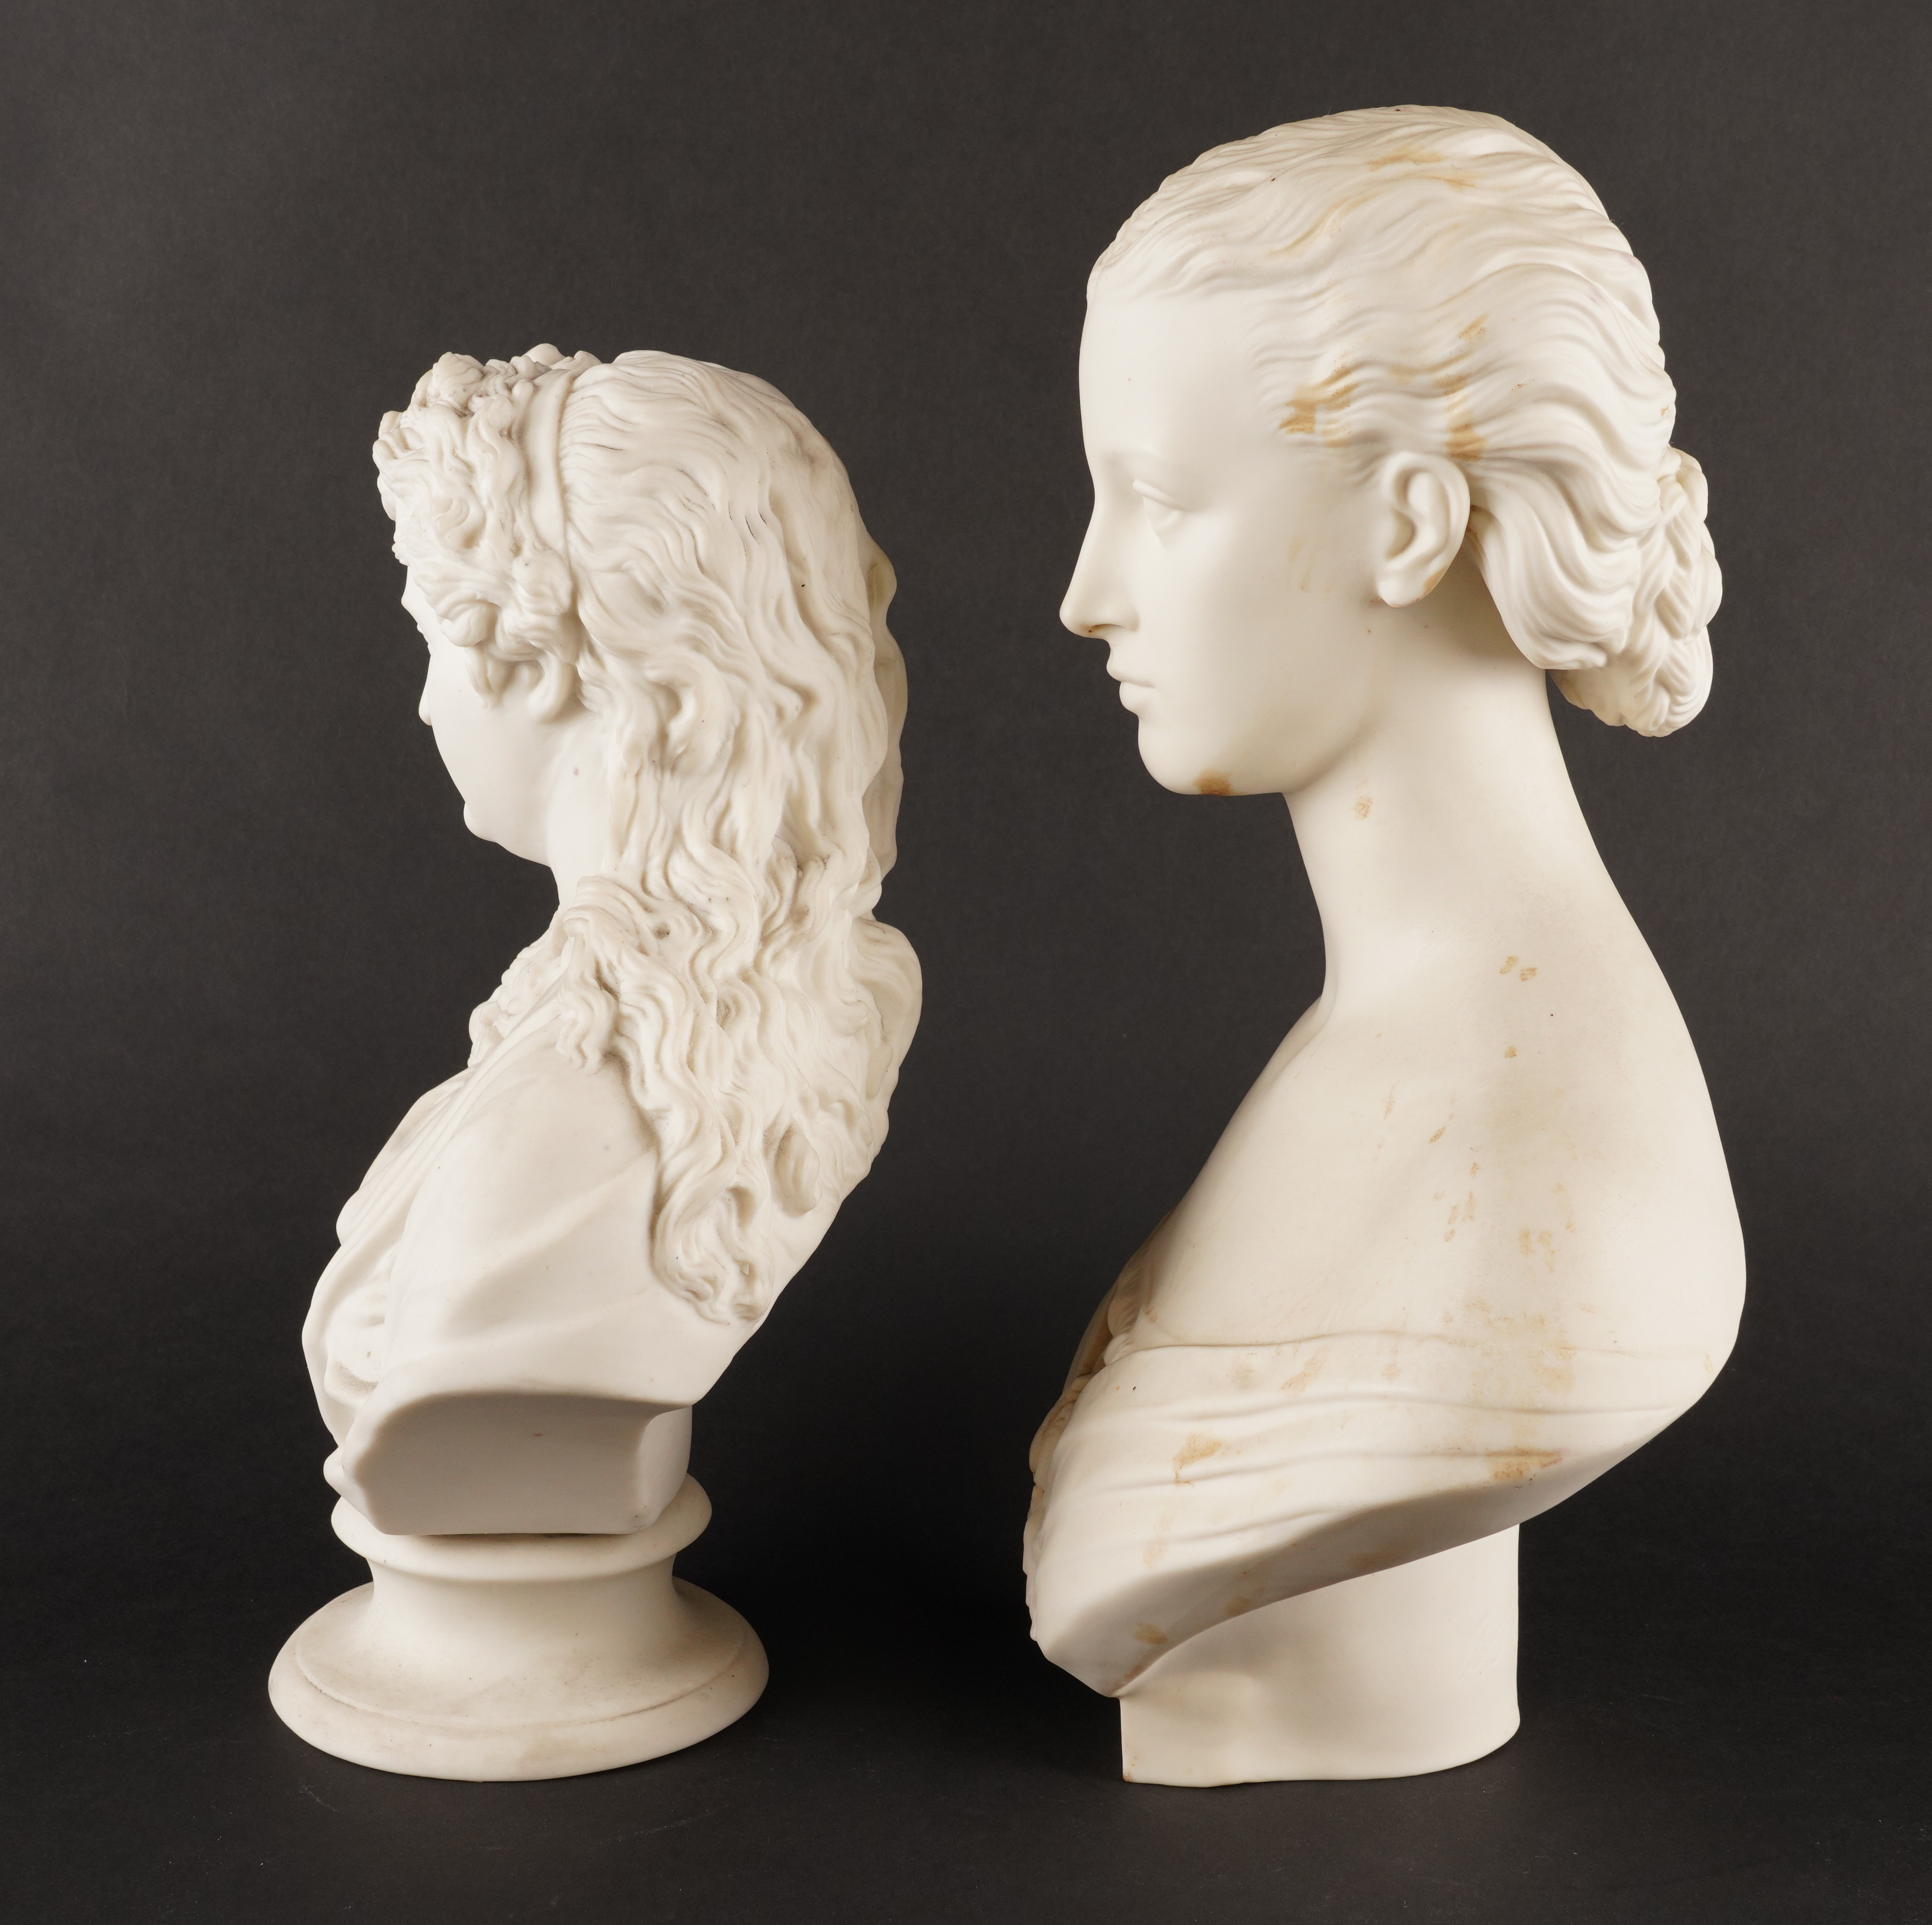 A PARIAN BUST OF ALEXANDRA AND ANOTHER FEMALE BUST (2) - Image 2 of 4